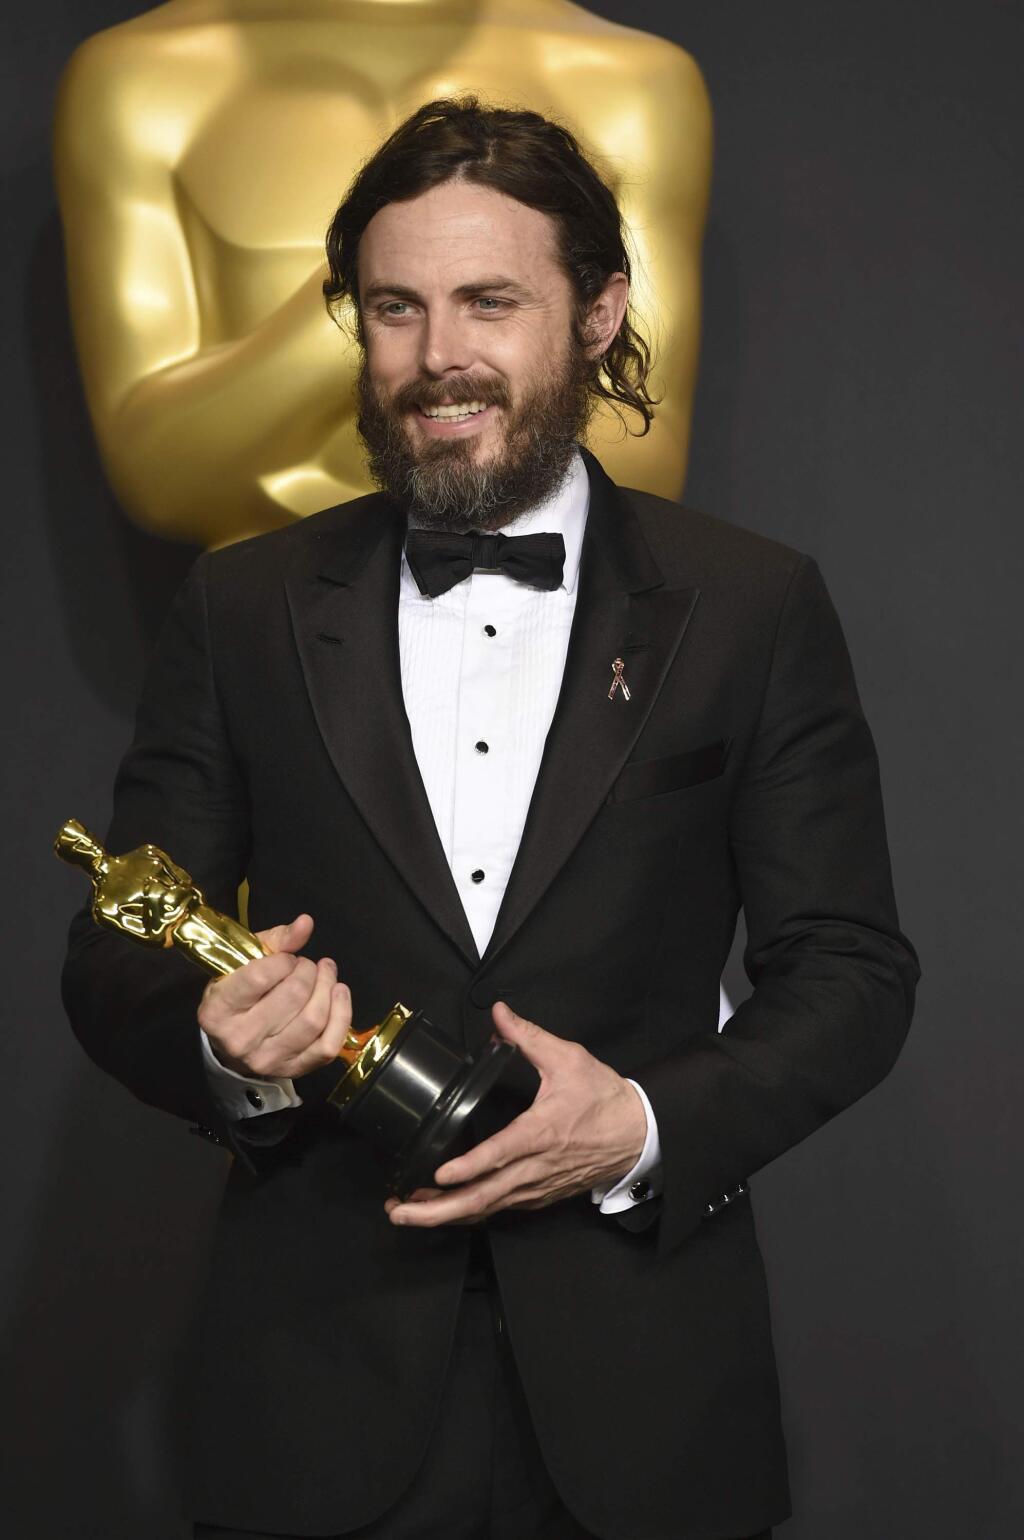 Casey Affleck poses in the press room with the award for best actor in a leading role for 'Manchester by the Sea' at the Oscars on Sunday, Feb. 26, 2017, at the Dolby Theatre in Los Angeles. (Photo by Jordan Strauss/Invision/AP)